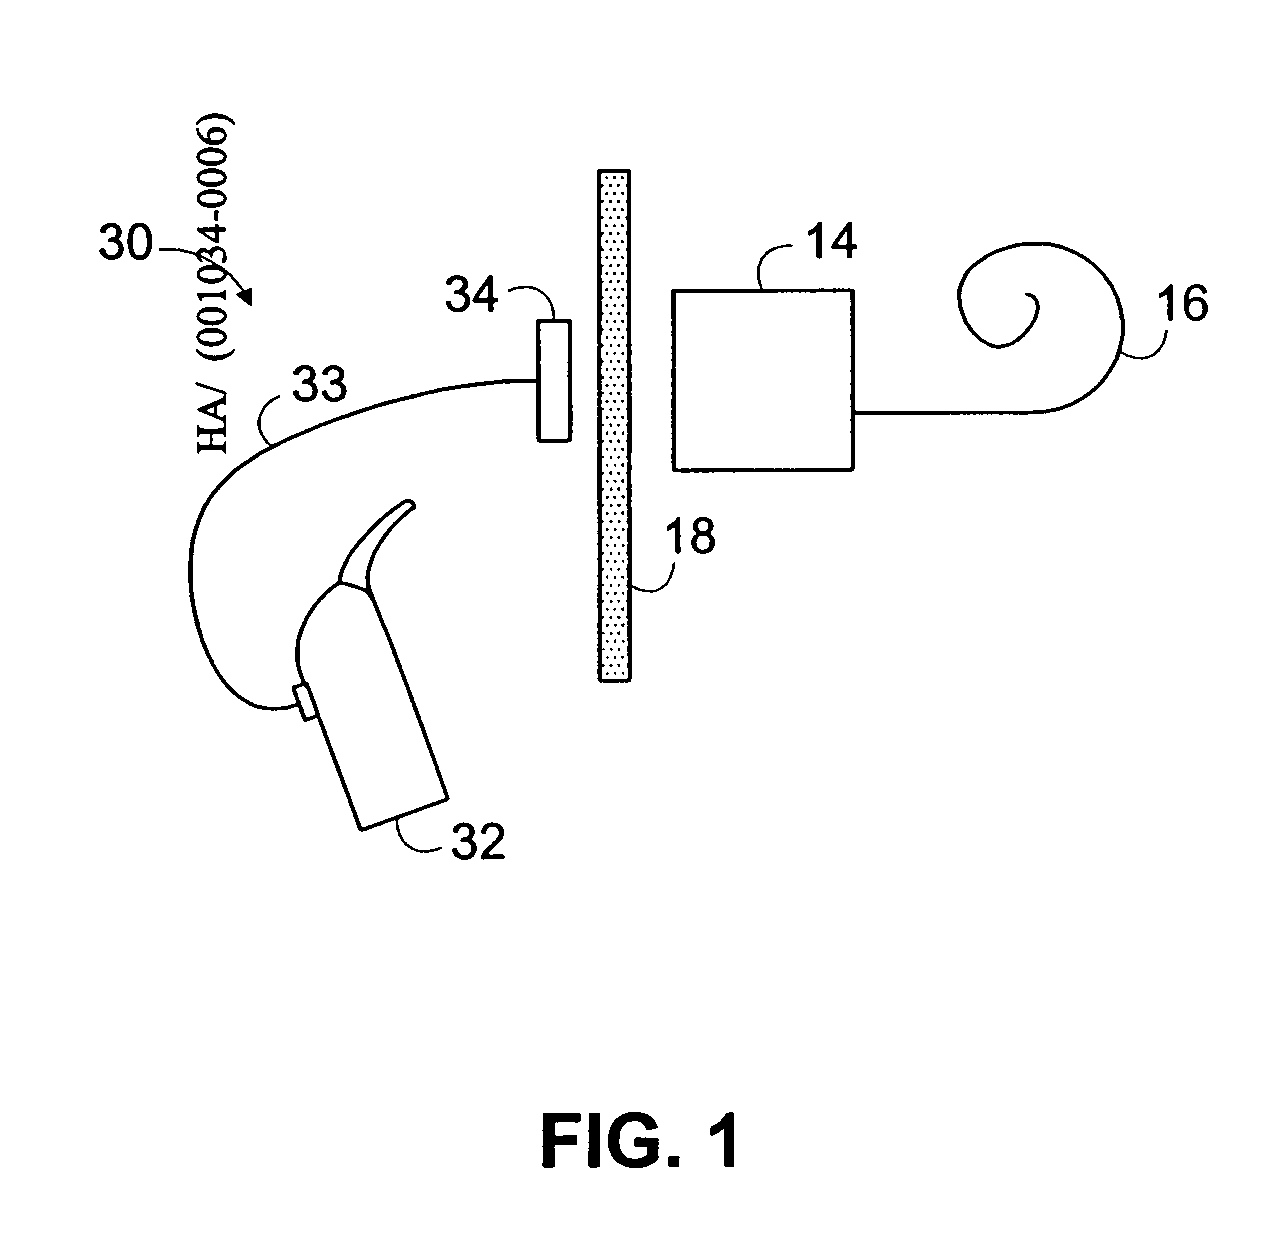 Sound processing and stimulation systems and methods for use with cochlear implant devices